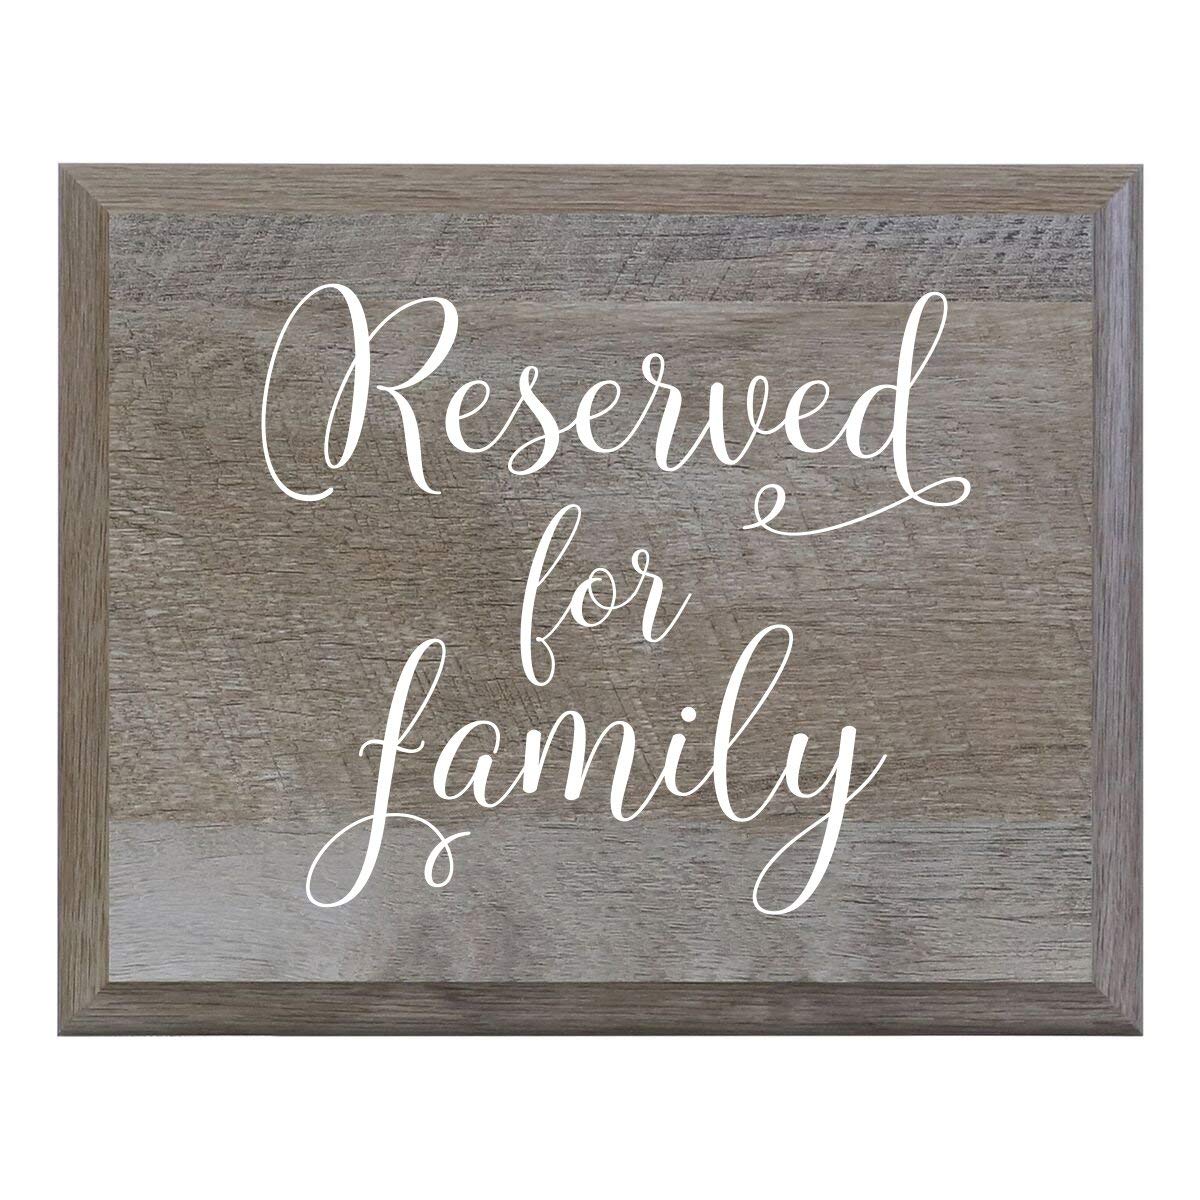 Reserved For Family Wooden Decorative Wedding Party sign (8x10) - LifeSong Milestones